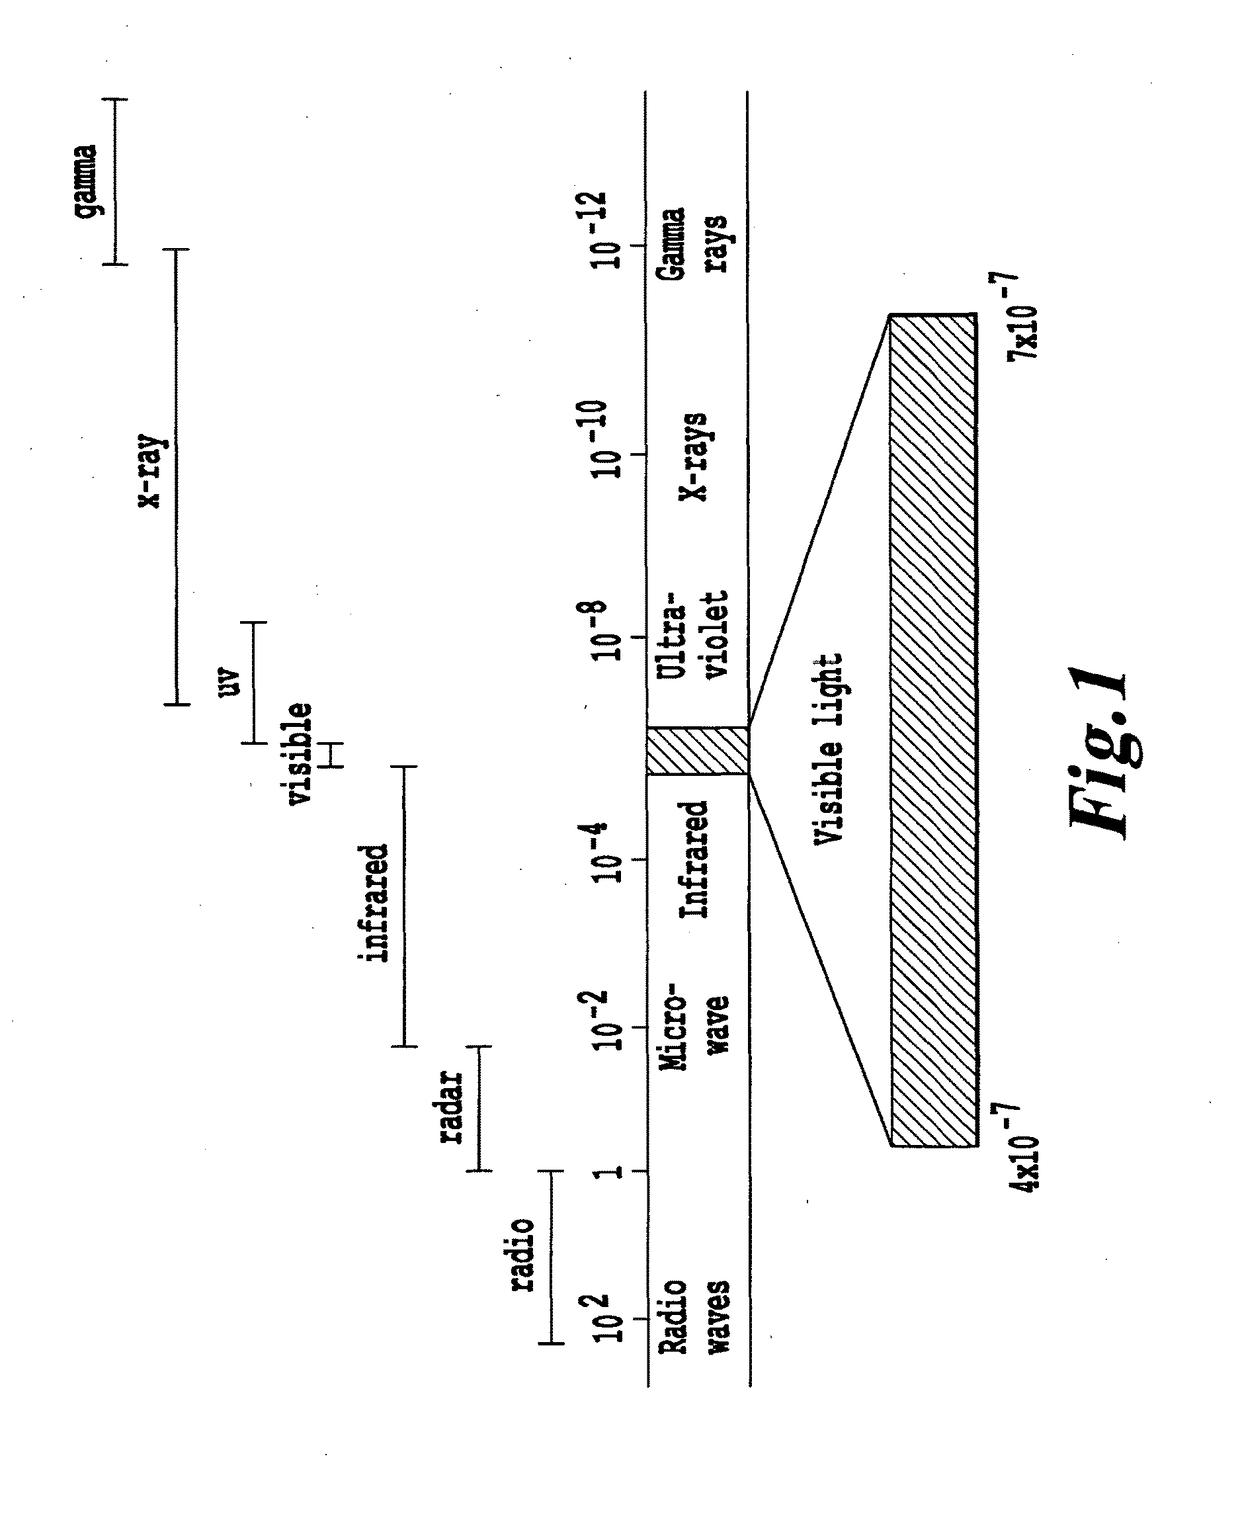 Non-invasive systems and methods for selective activation of photoreactive responses